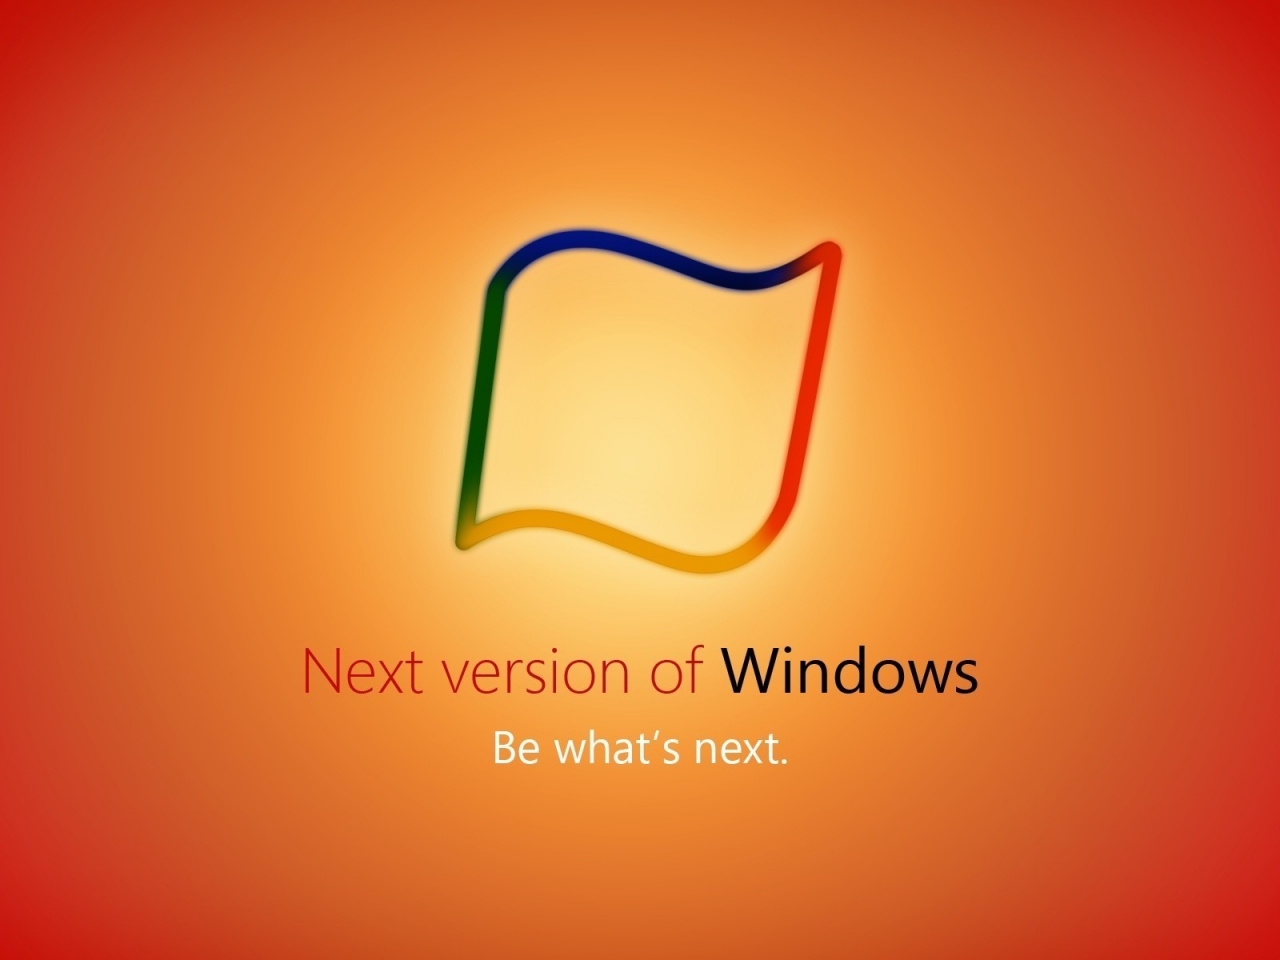 Next Version of Windows for 1280 x 960 resolution